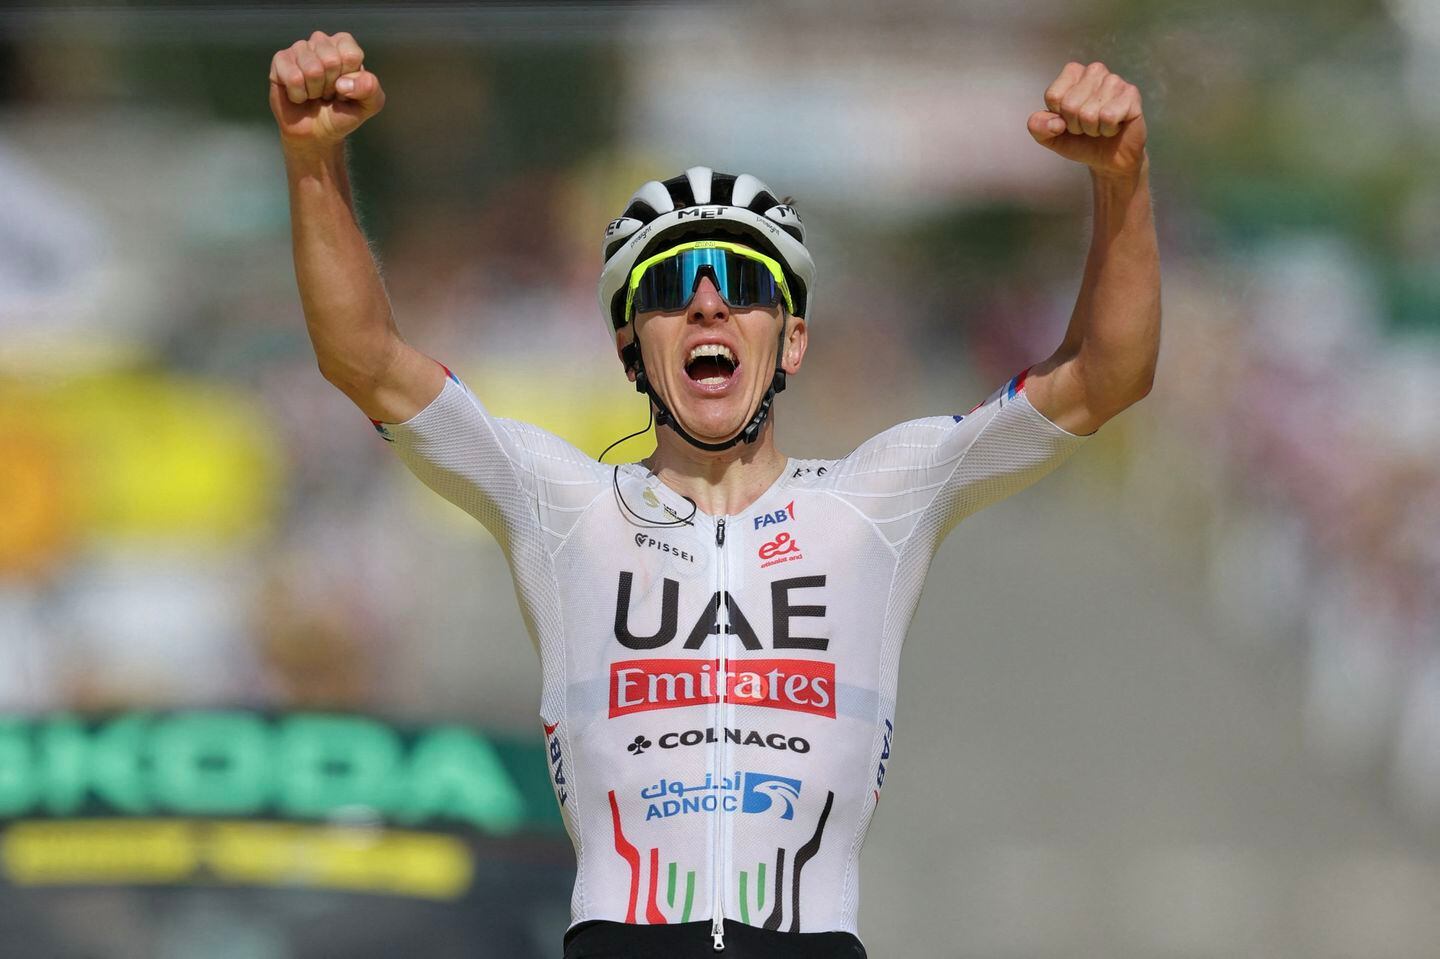 Tadej Pogacar captured his 12th career stage win at the Tour de France.